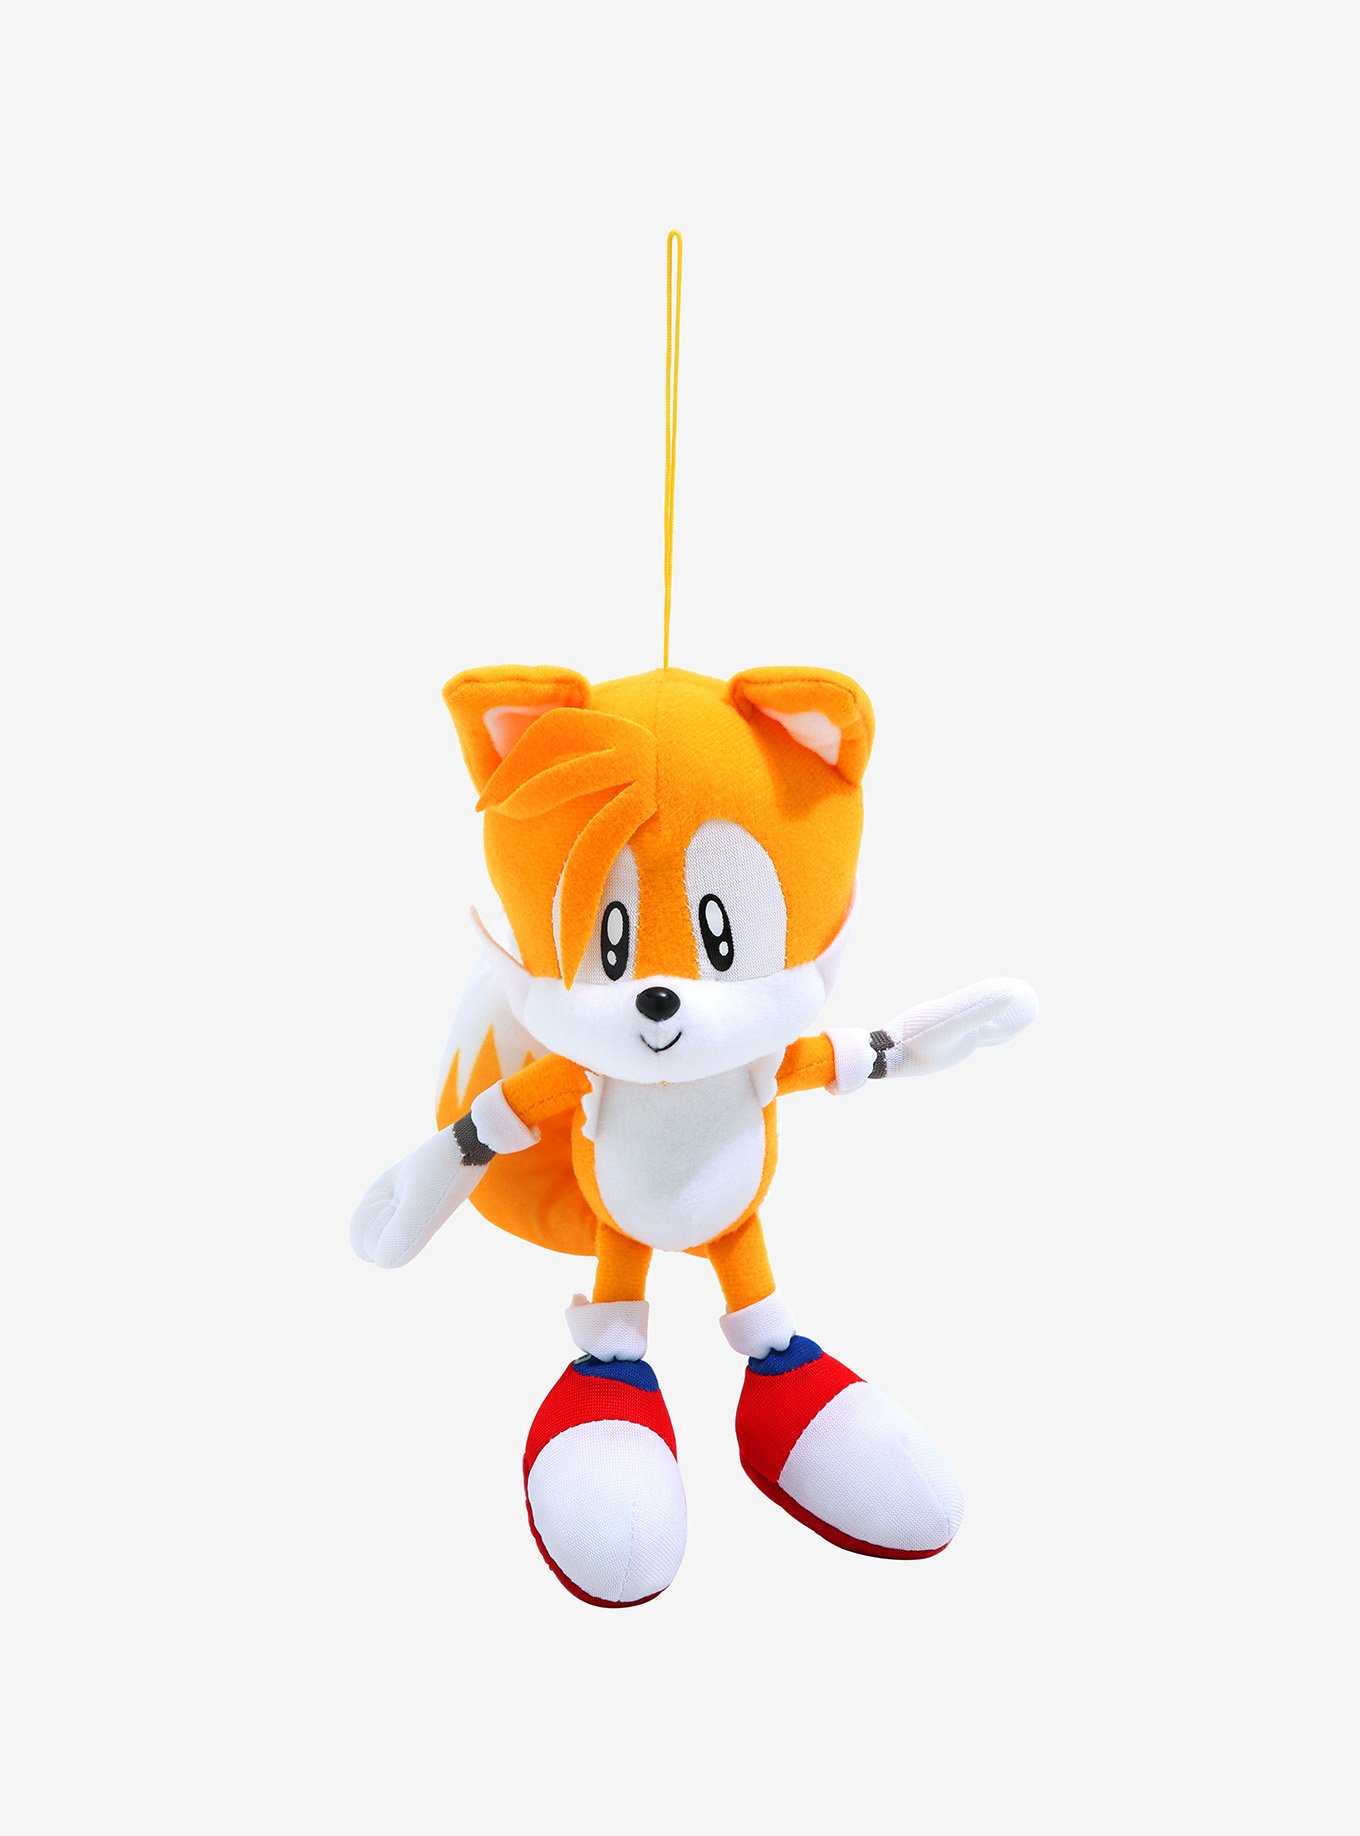 TAILS (Live Action) Recreation by me